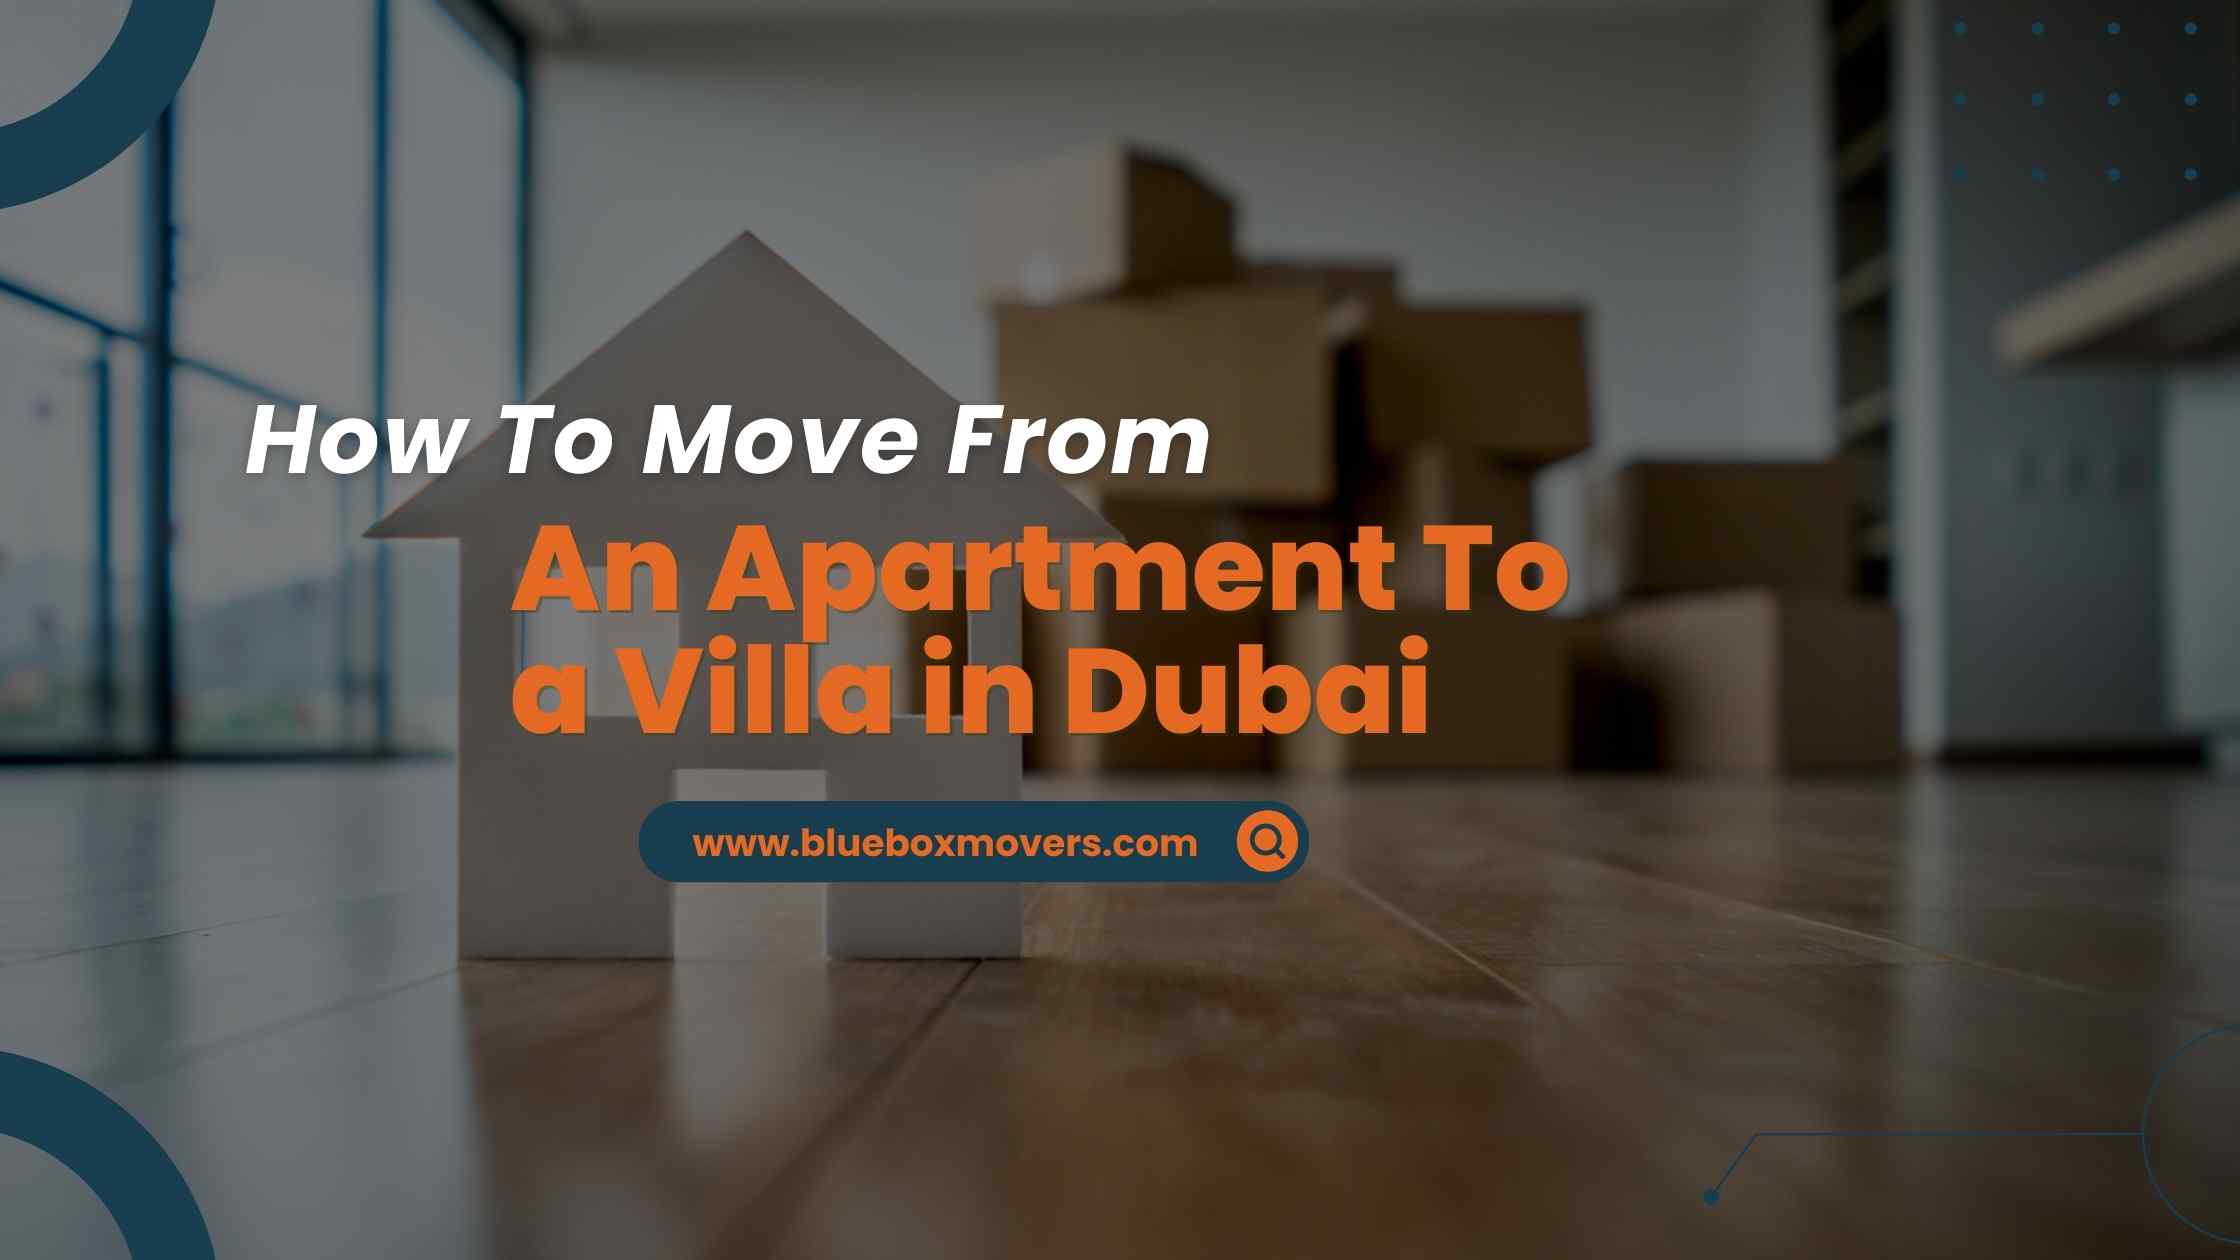 How To Move From an apartment to a villa in Dubai